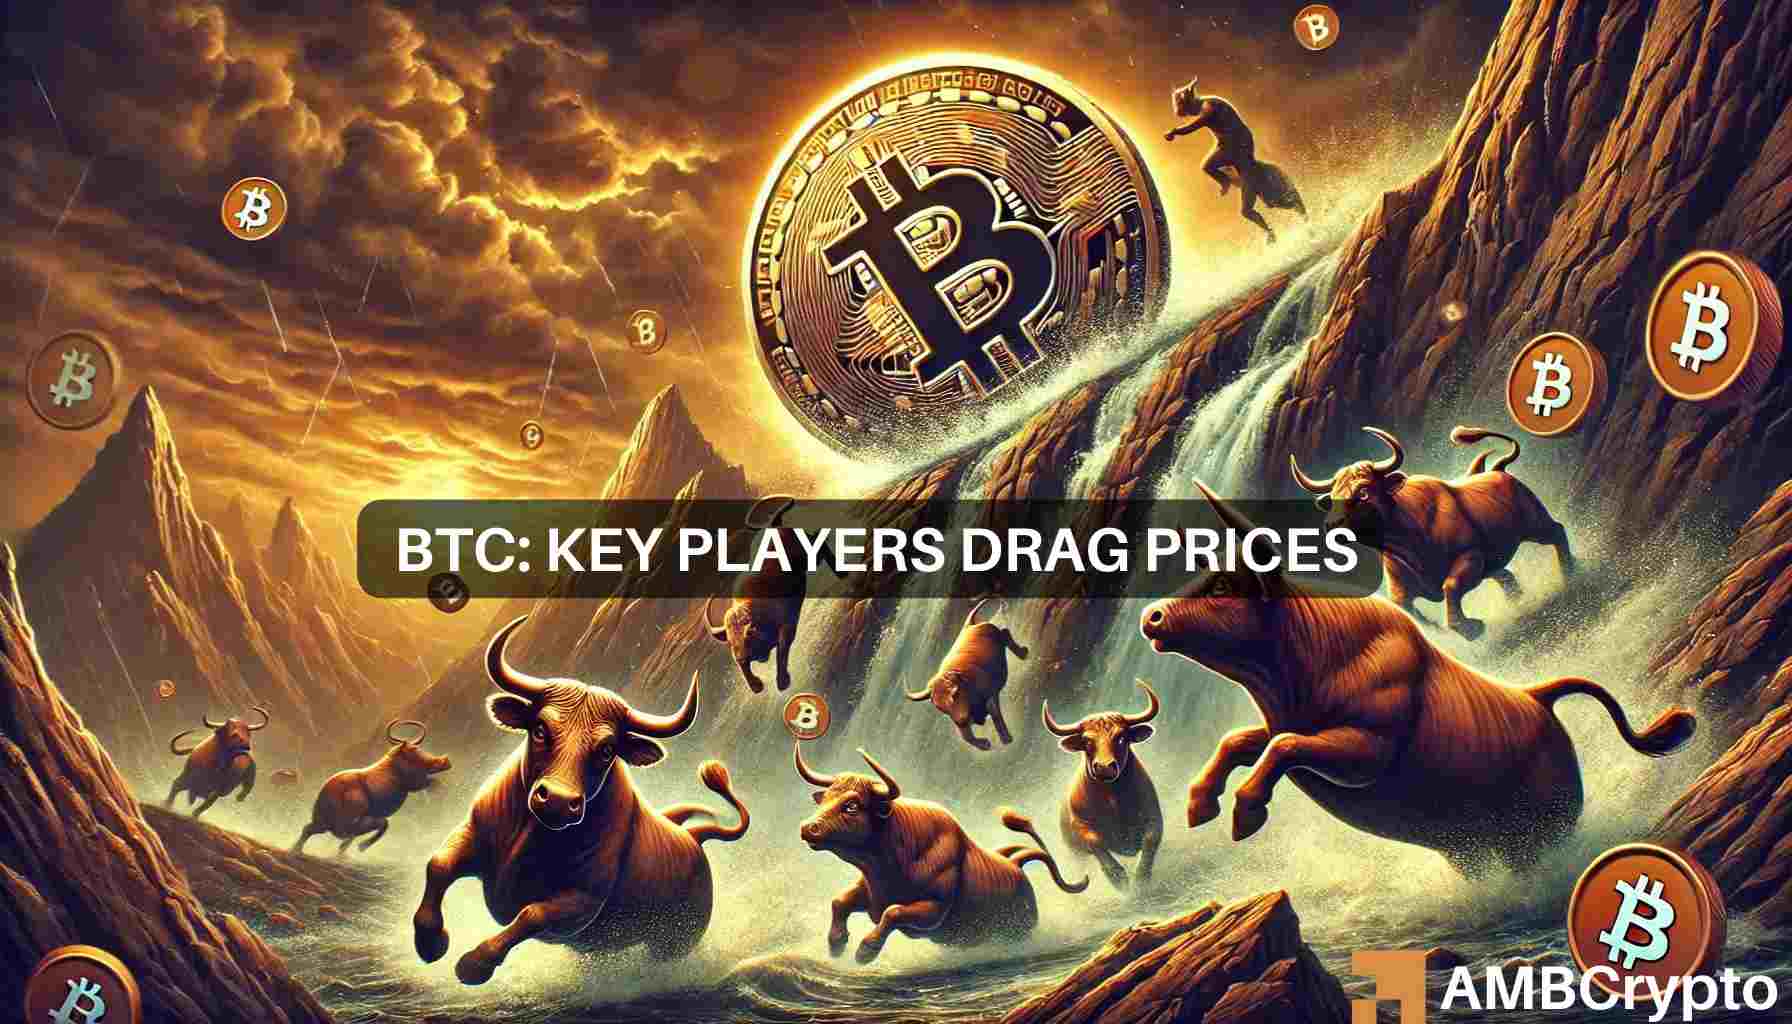 Why hasn’t Bitcoin mooned yet? Exec blames THESE key players